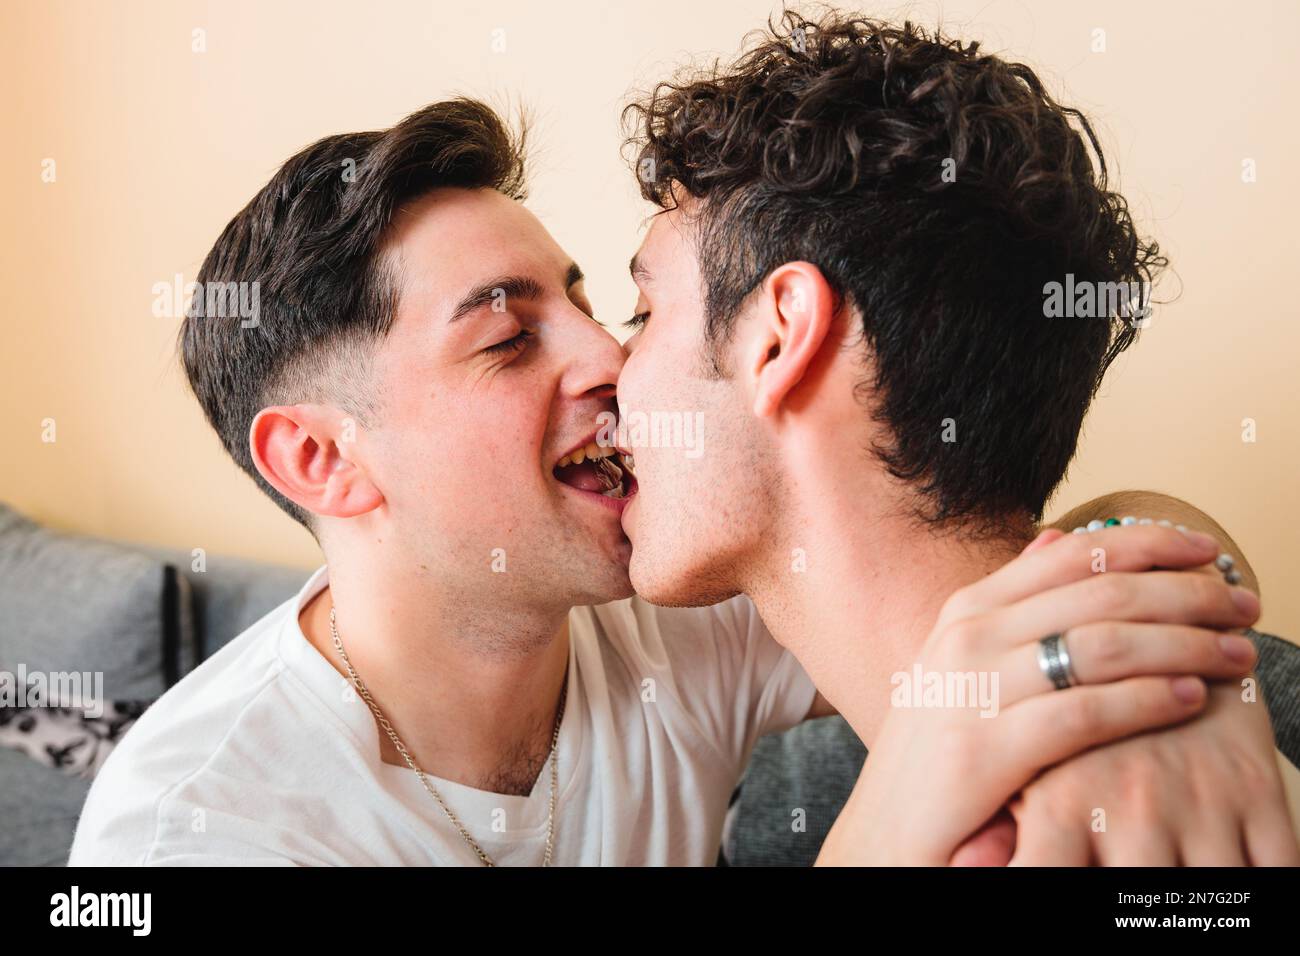 Close up of a gay couple romantically kissing on the mouth, playing and smiling. LGBT relationship  Stock Photo